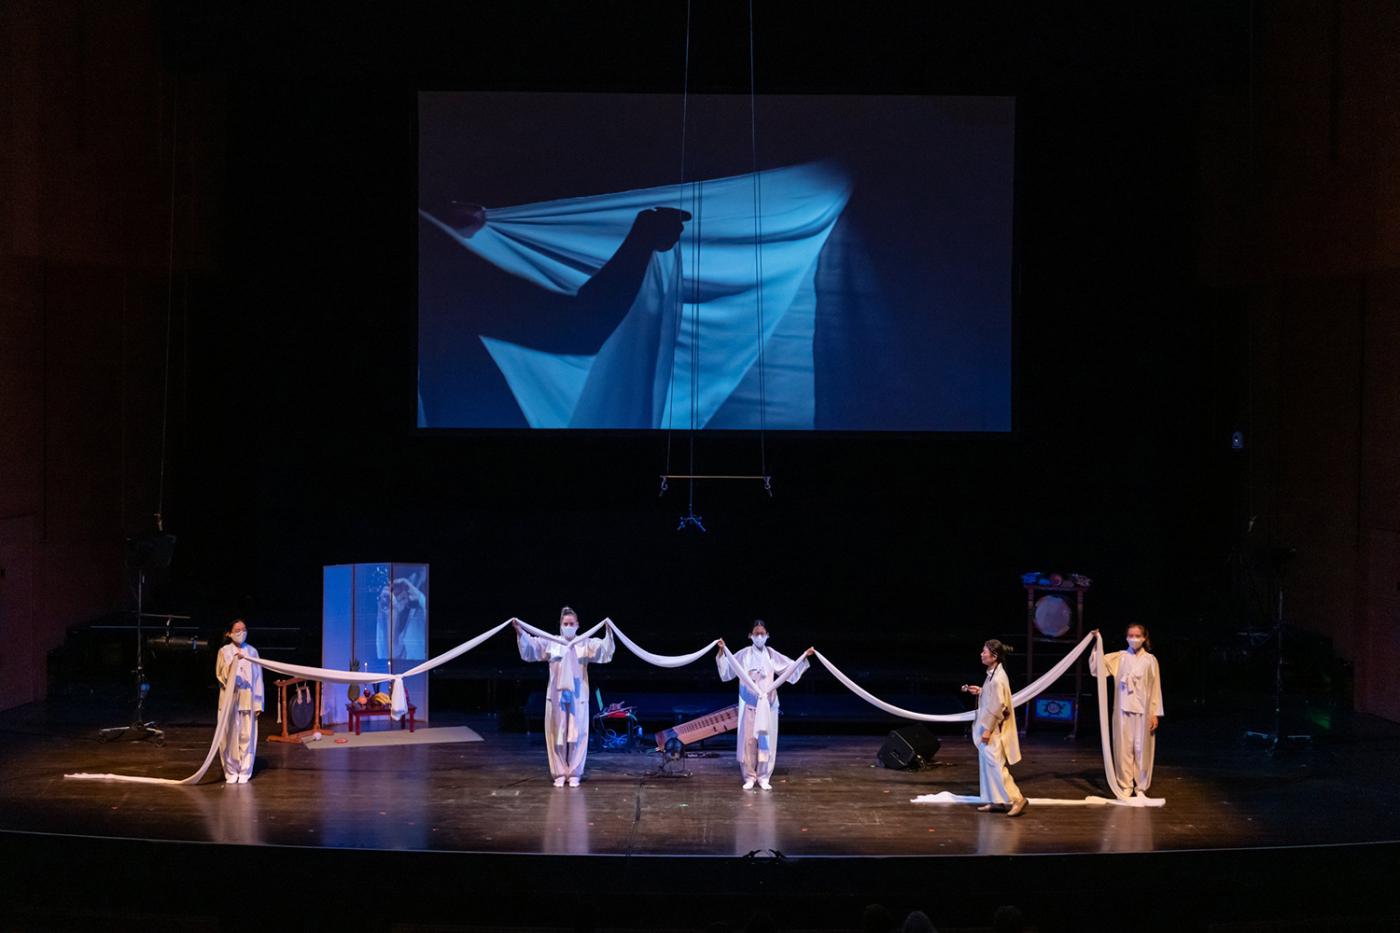 On a stage, four folks, and Jin Hi, hold up a white cloth. behind them, a projection of a person with a white cloth.